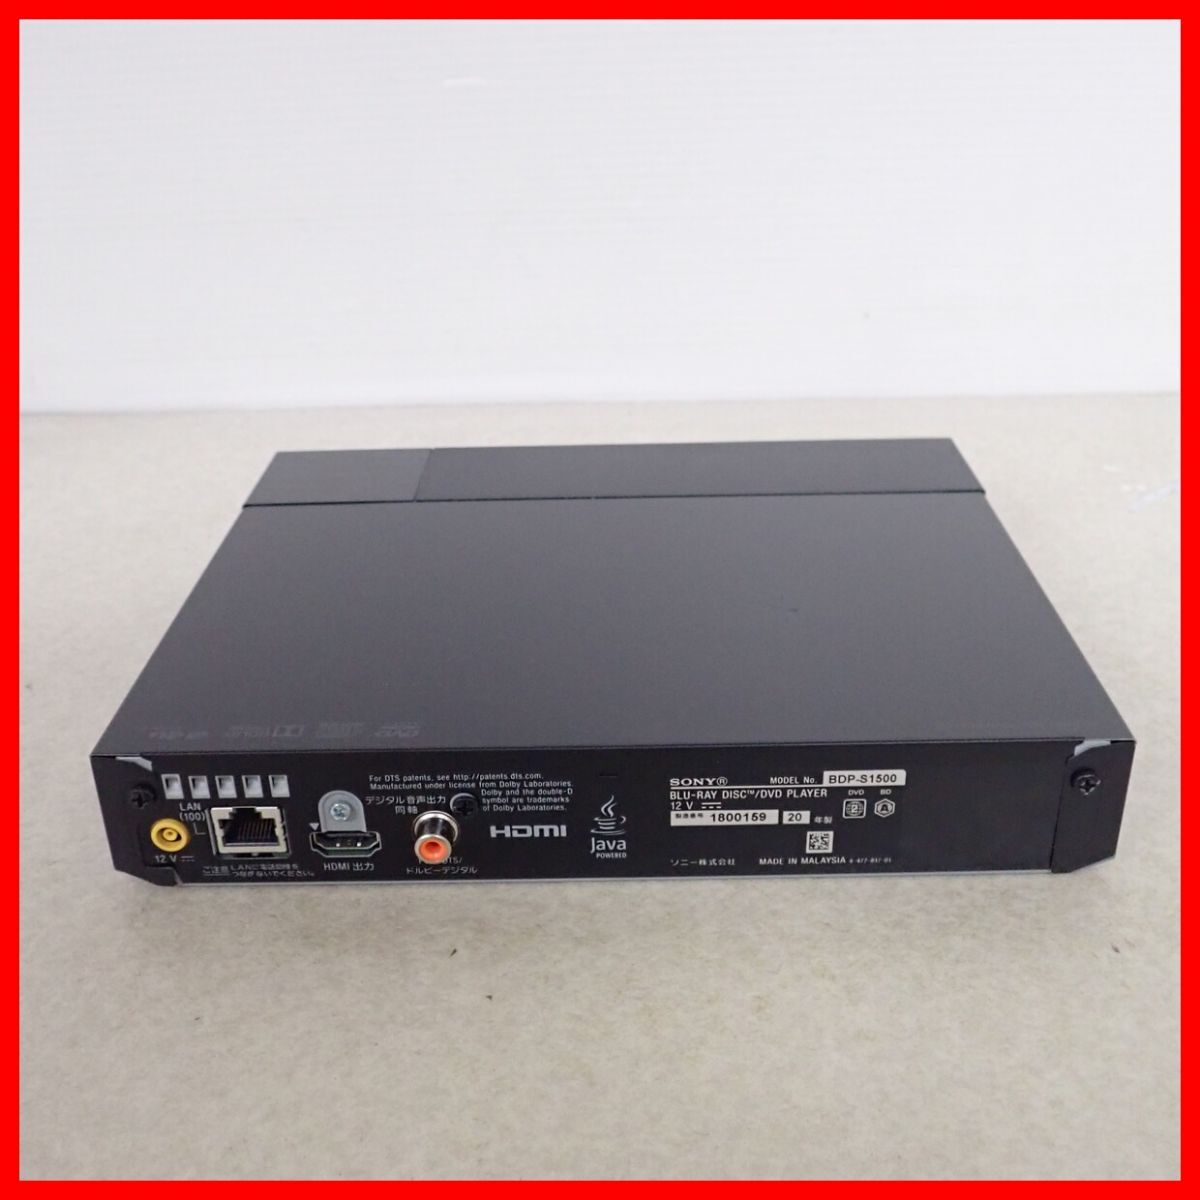 * operation goods SONY BD/DVD player BDP-S1500 Sony box opinion attaching [20